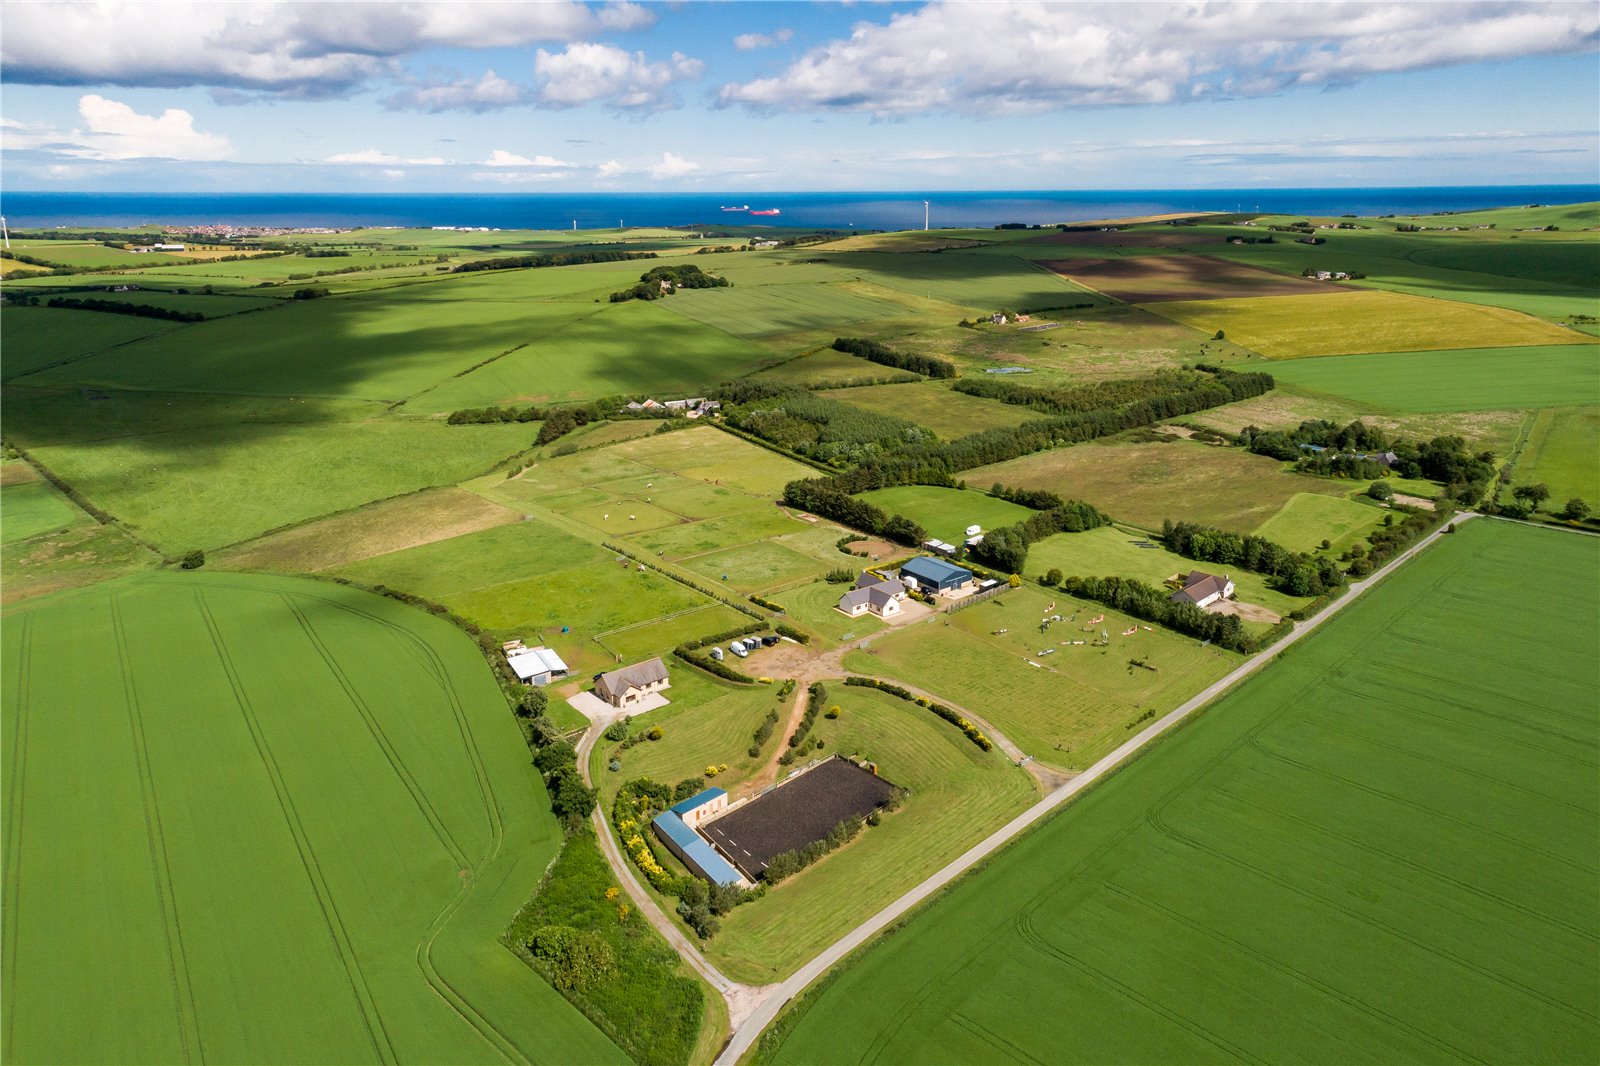 Equestrian Property For Sale Aberdeenshire